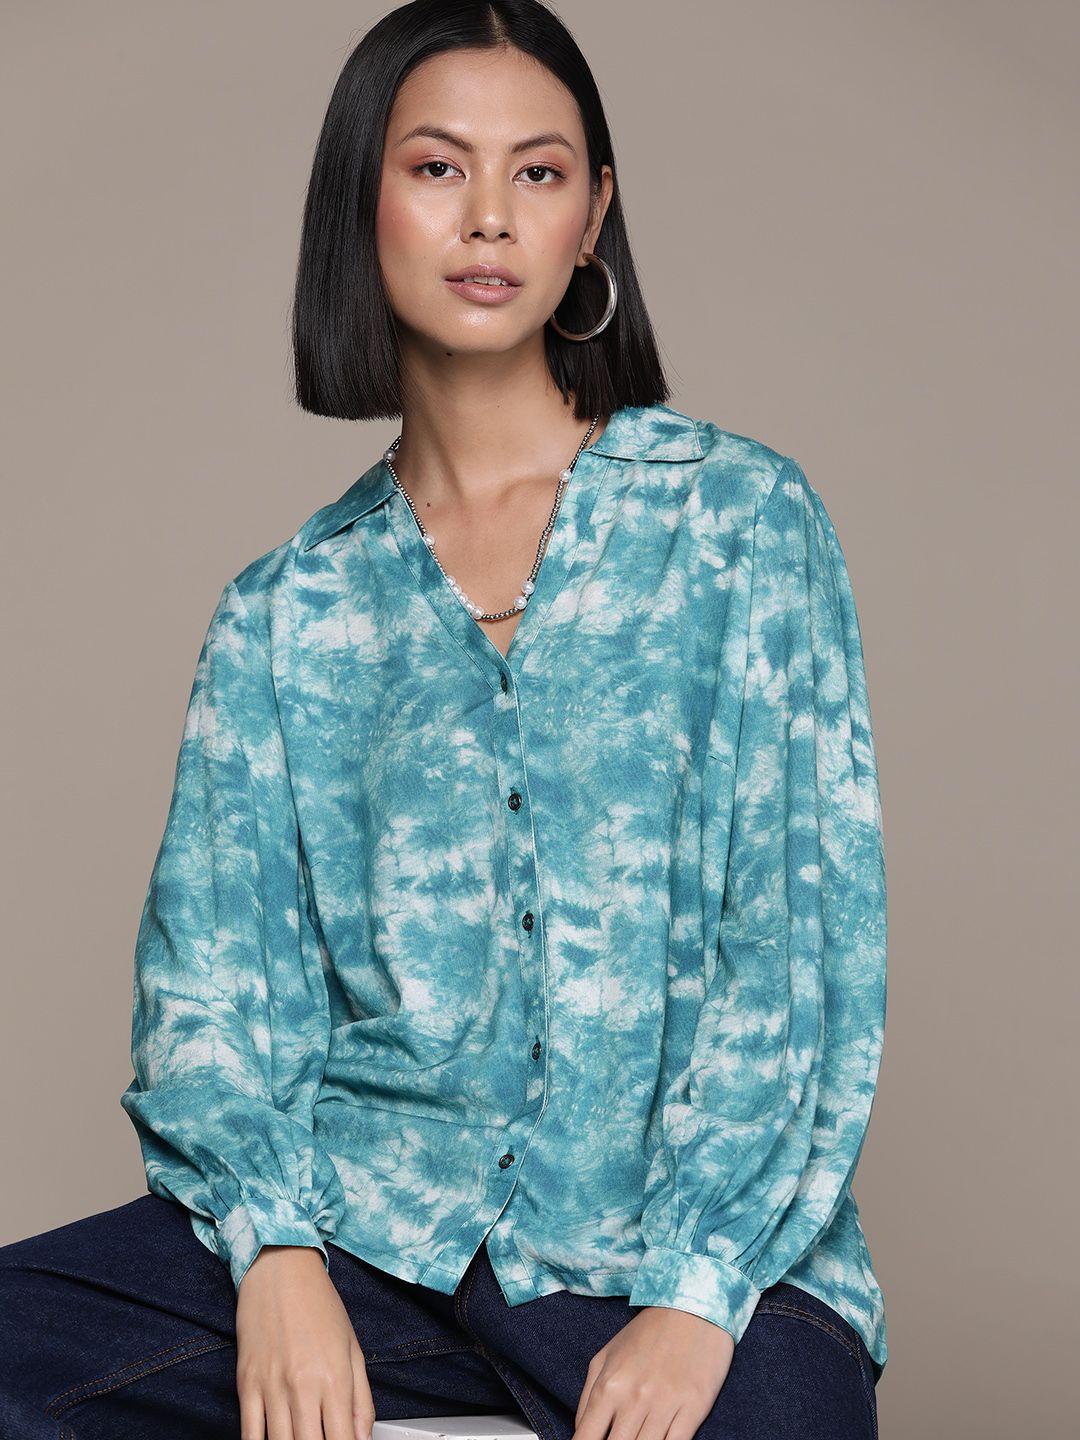 the roadster lifestyle co. tie & dye puff sleeves shirt